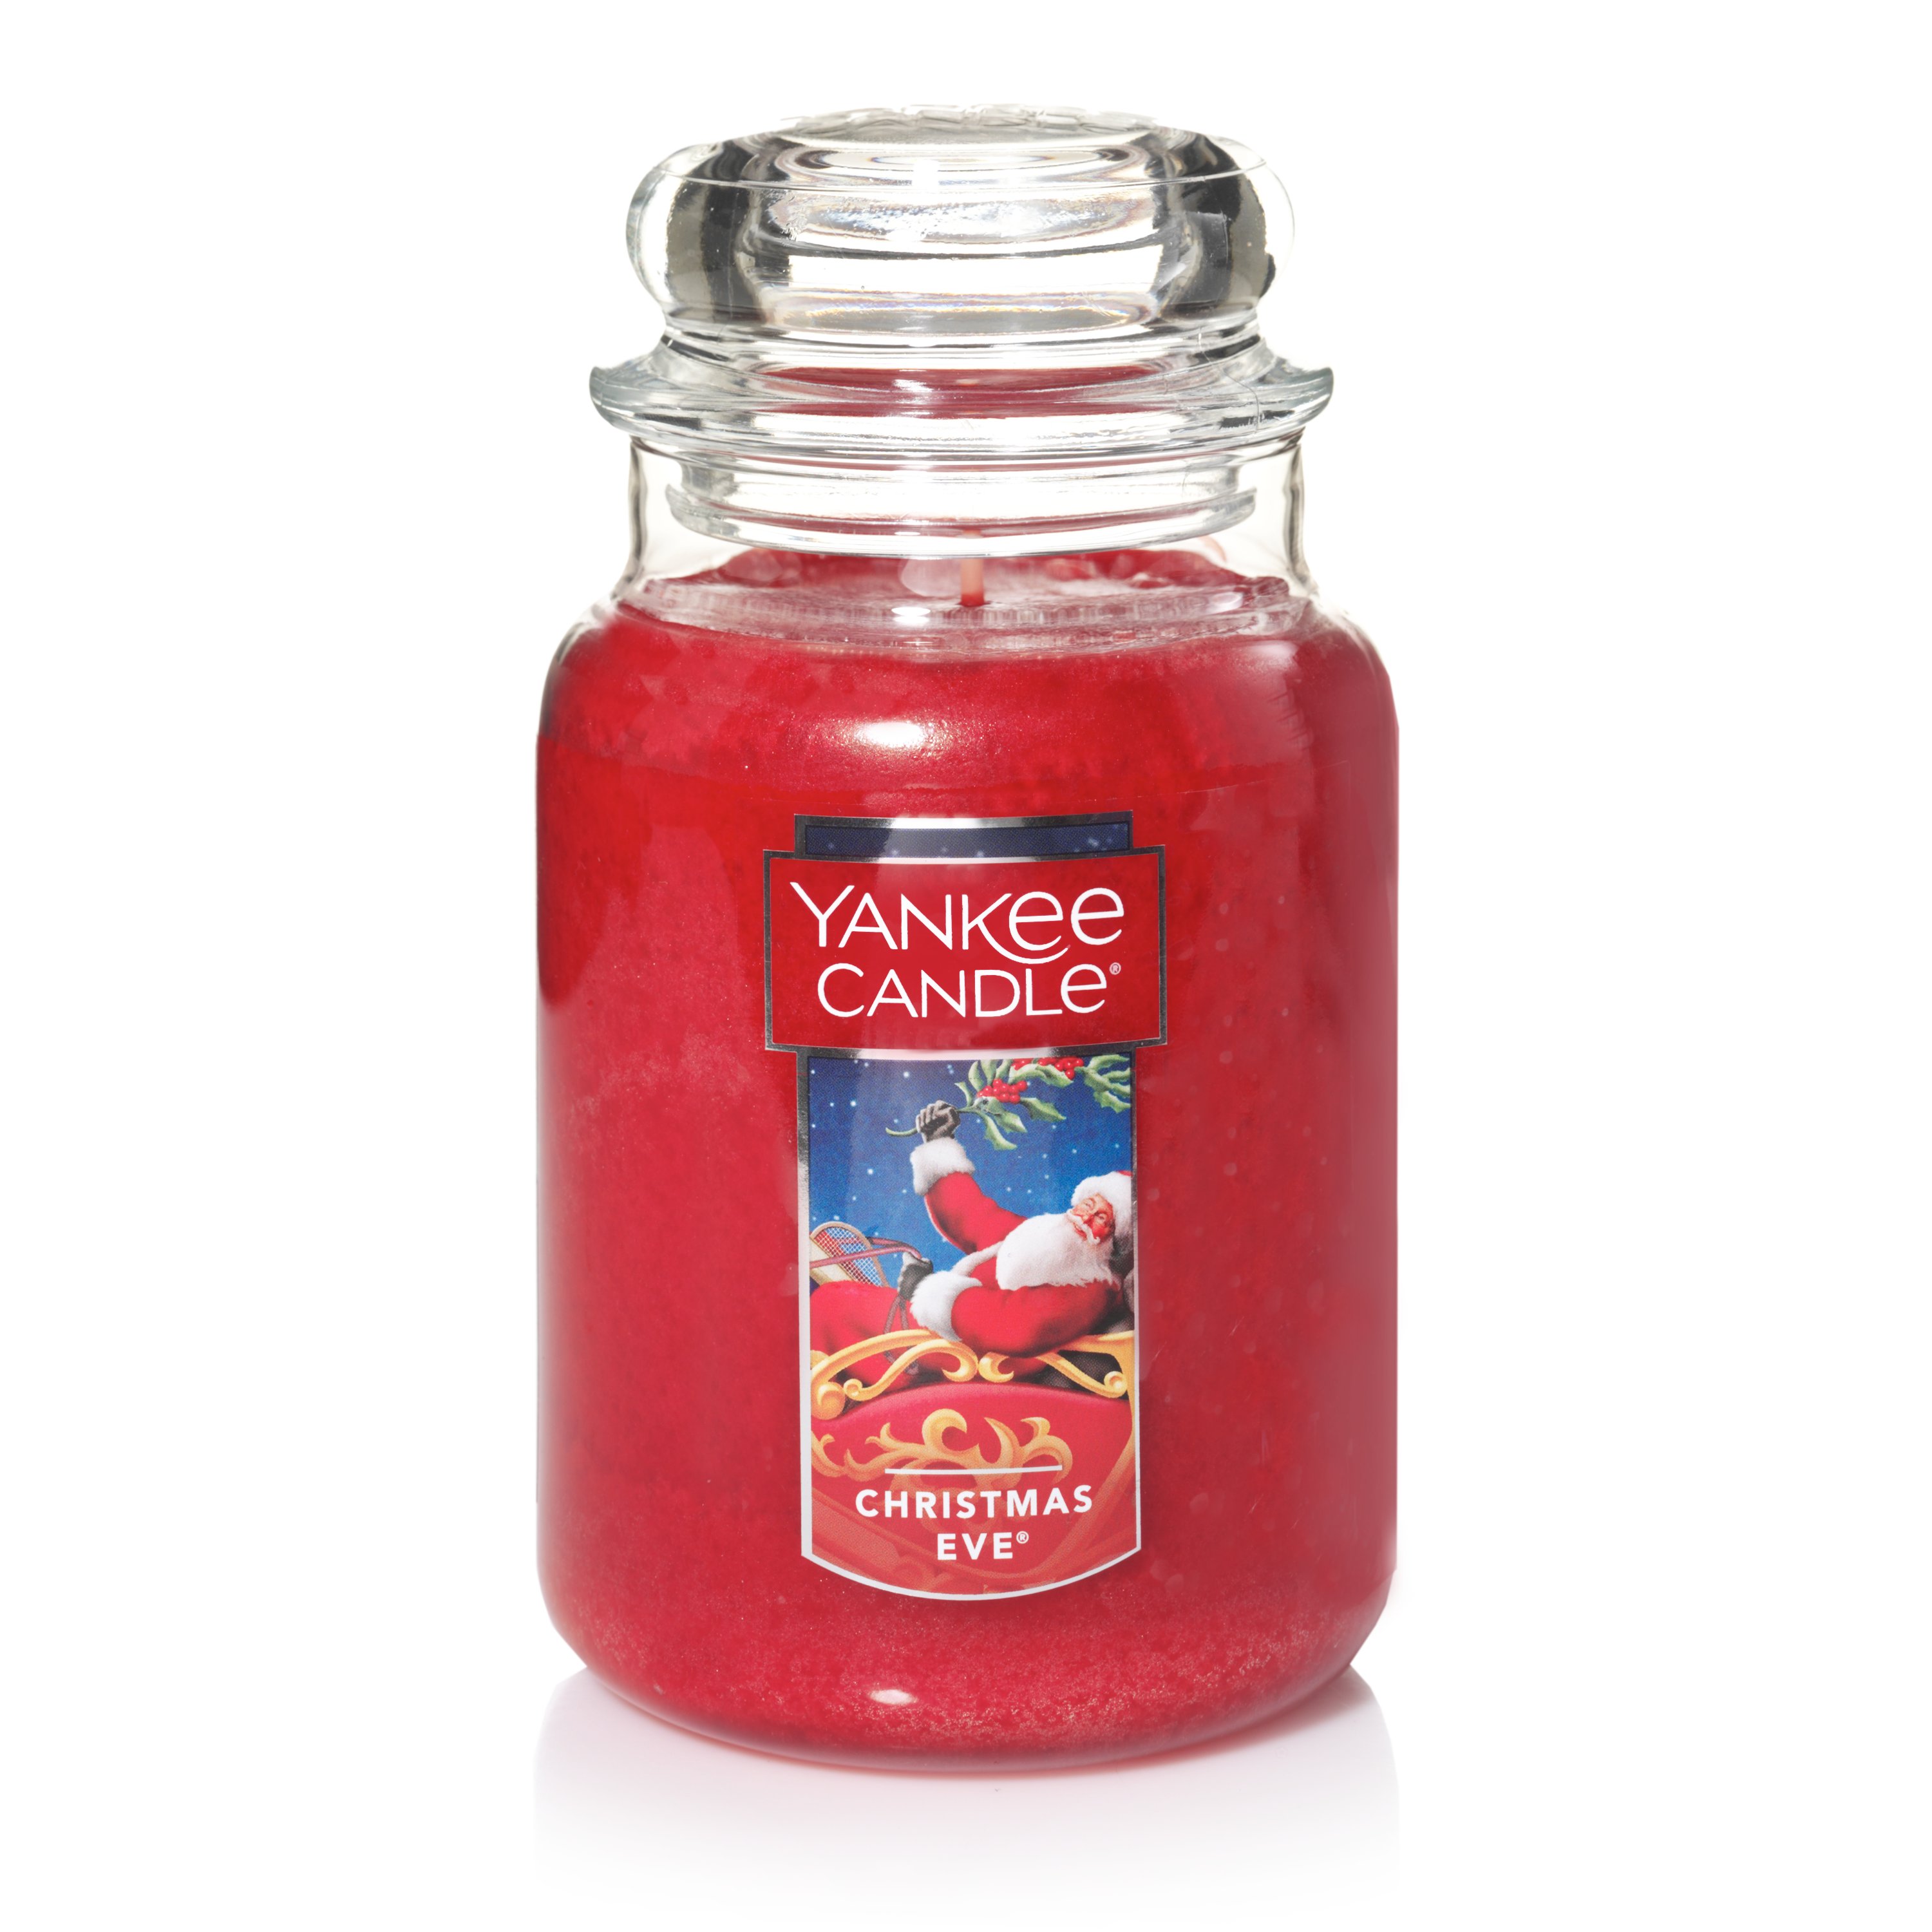 YANKEE CANDLE ~ You Choose Festive Scent ~ Large Jar *Free Expedited Shipping* 